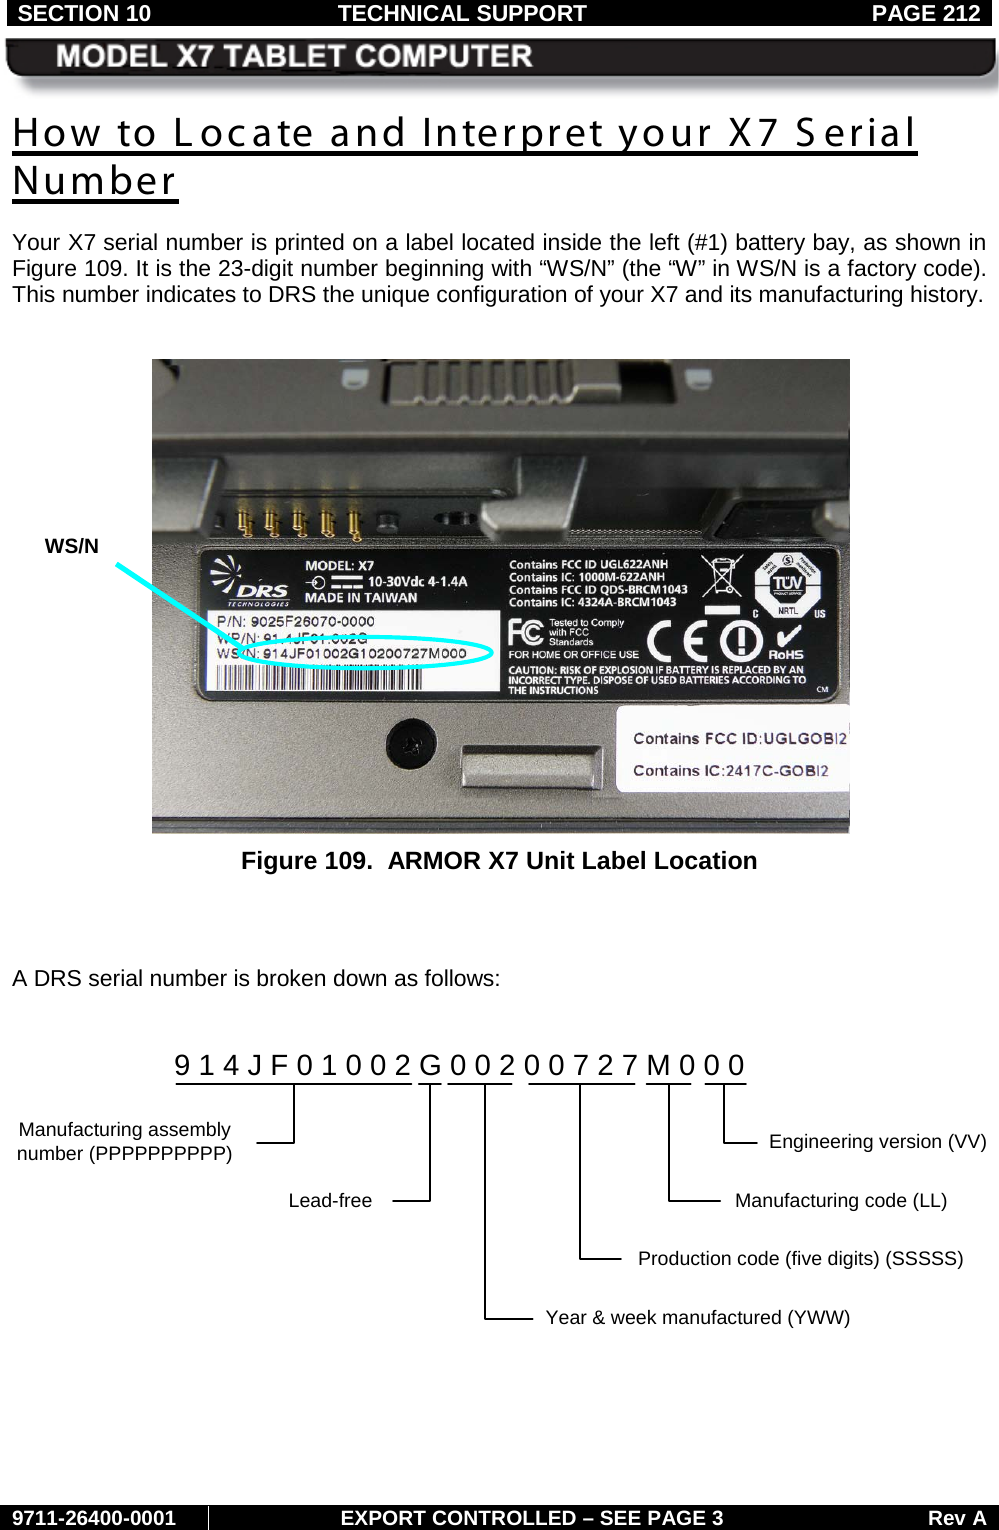 SECTION 10 TECHNICAL SUPPORT  PAGE 212     9711-26400-0001 EXPORT CONTROLLED – SEE PAGE 3 Rev A How to Locate and Interpret your X7 Serial Number Your X7 serial number is printed on a label located inside the left (#1) battery bay, as shown in Figure 109. It is the 23-digit number beginning with “WS/N” (the “W” in WS/N is a factory code). This number indicates to DRS the unique configuration of your X7 and its manufacturing history.   Figure 109.  ARMOR X7 Unit Label Location   A DRS serial number is broken down as follows:    9 1 4 J F 0 1 0 0 2 G 0 0 2 0 0 7 2 7 M 0 0 0Year &amp; week manufactured (YWW)Production code (five digits) (SSSSS)Manufacturing code (LL)Engineering version (VV)Manufacturing assembly number (PPPPPPPPPP)Lead-freeWS/N 